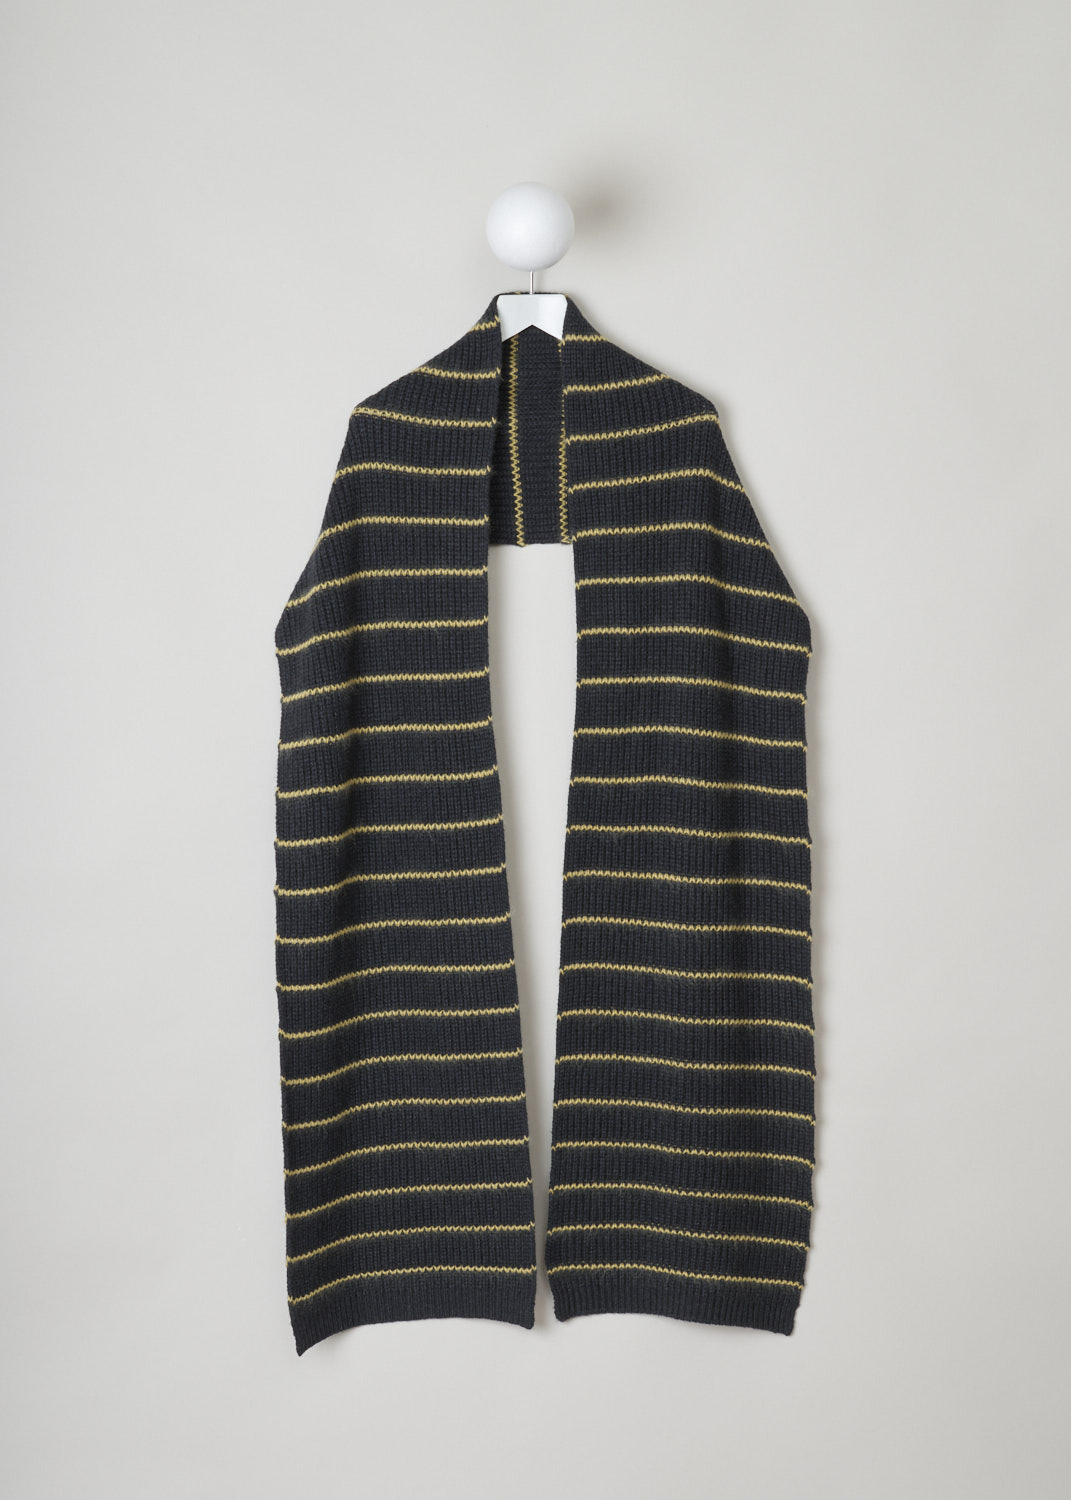 Brunello Cucinelli, Charcoal cashmere shawl, M52528499_CM723, grey yellow, front,  Knitted cashmere shawl with the characteristic softness of Brunello Cucinelli. Comes in a two tone colour theme, being a charcoal grey and a lovely shade of yellow. 

Shawl length: 240 cm / 94.4 inch.